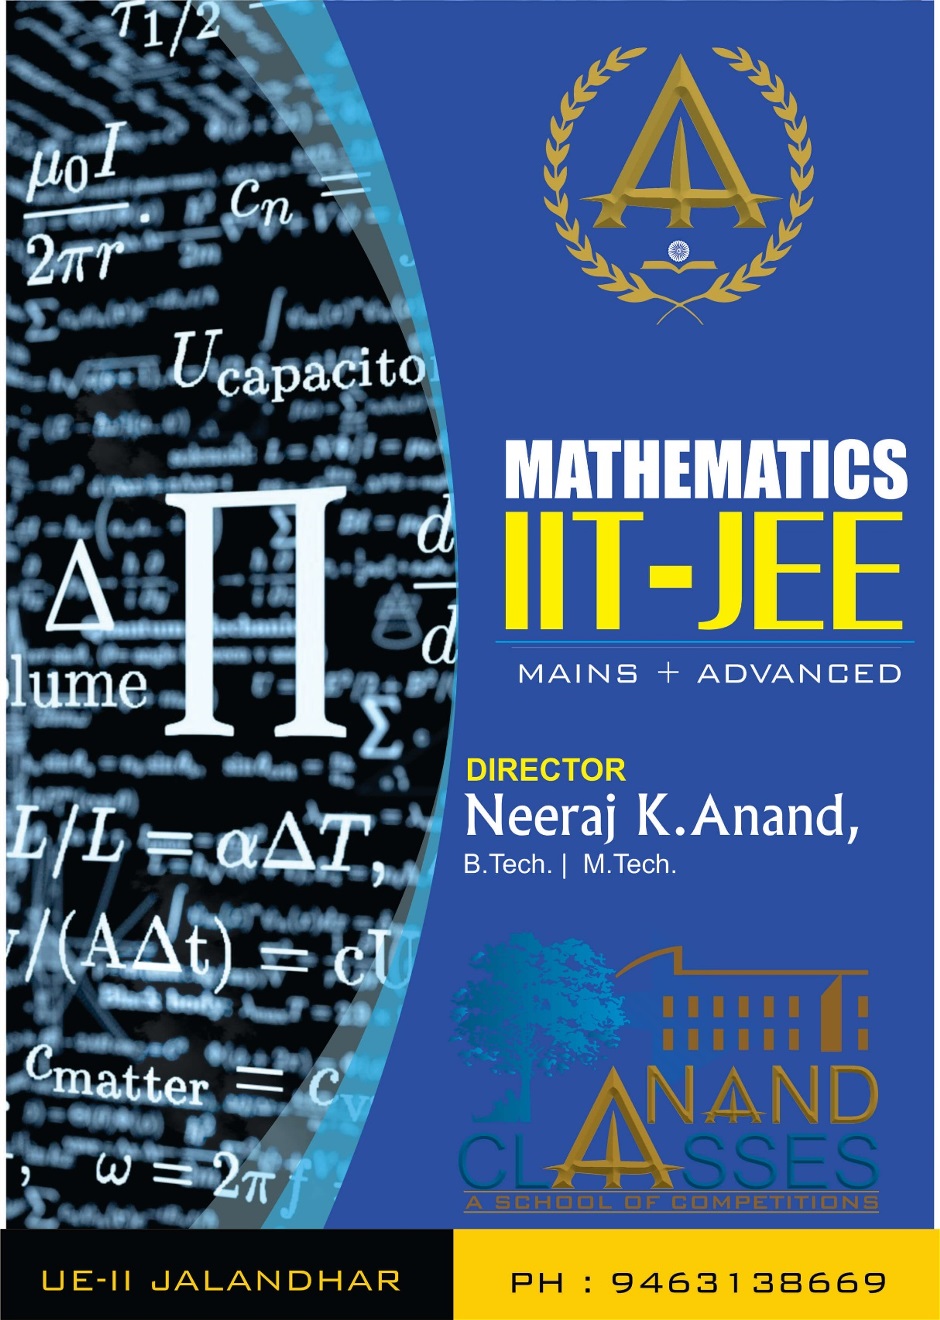 CALL 9463138669, ANAND CLASSES–ONLINE COACHING CENTER FOR CLASS 10/X MATH, SCIENCE, SOCIAL STUDIES EXAMS IN JALANDHAR.